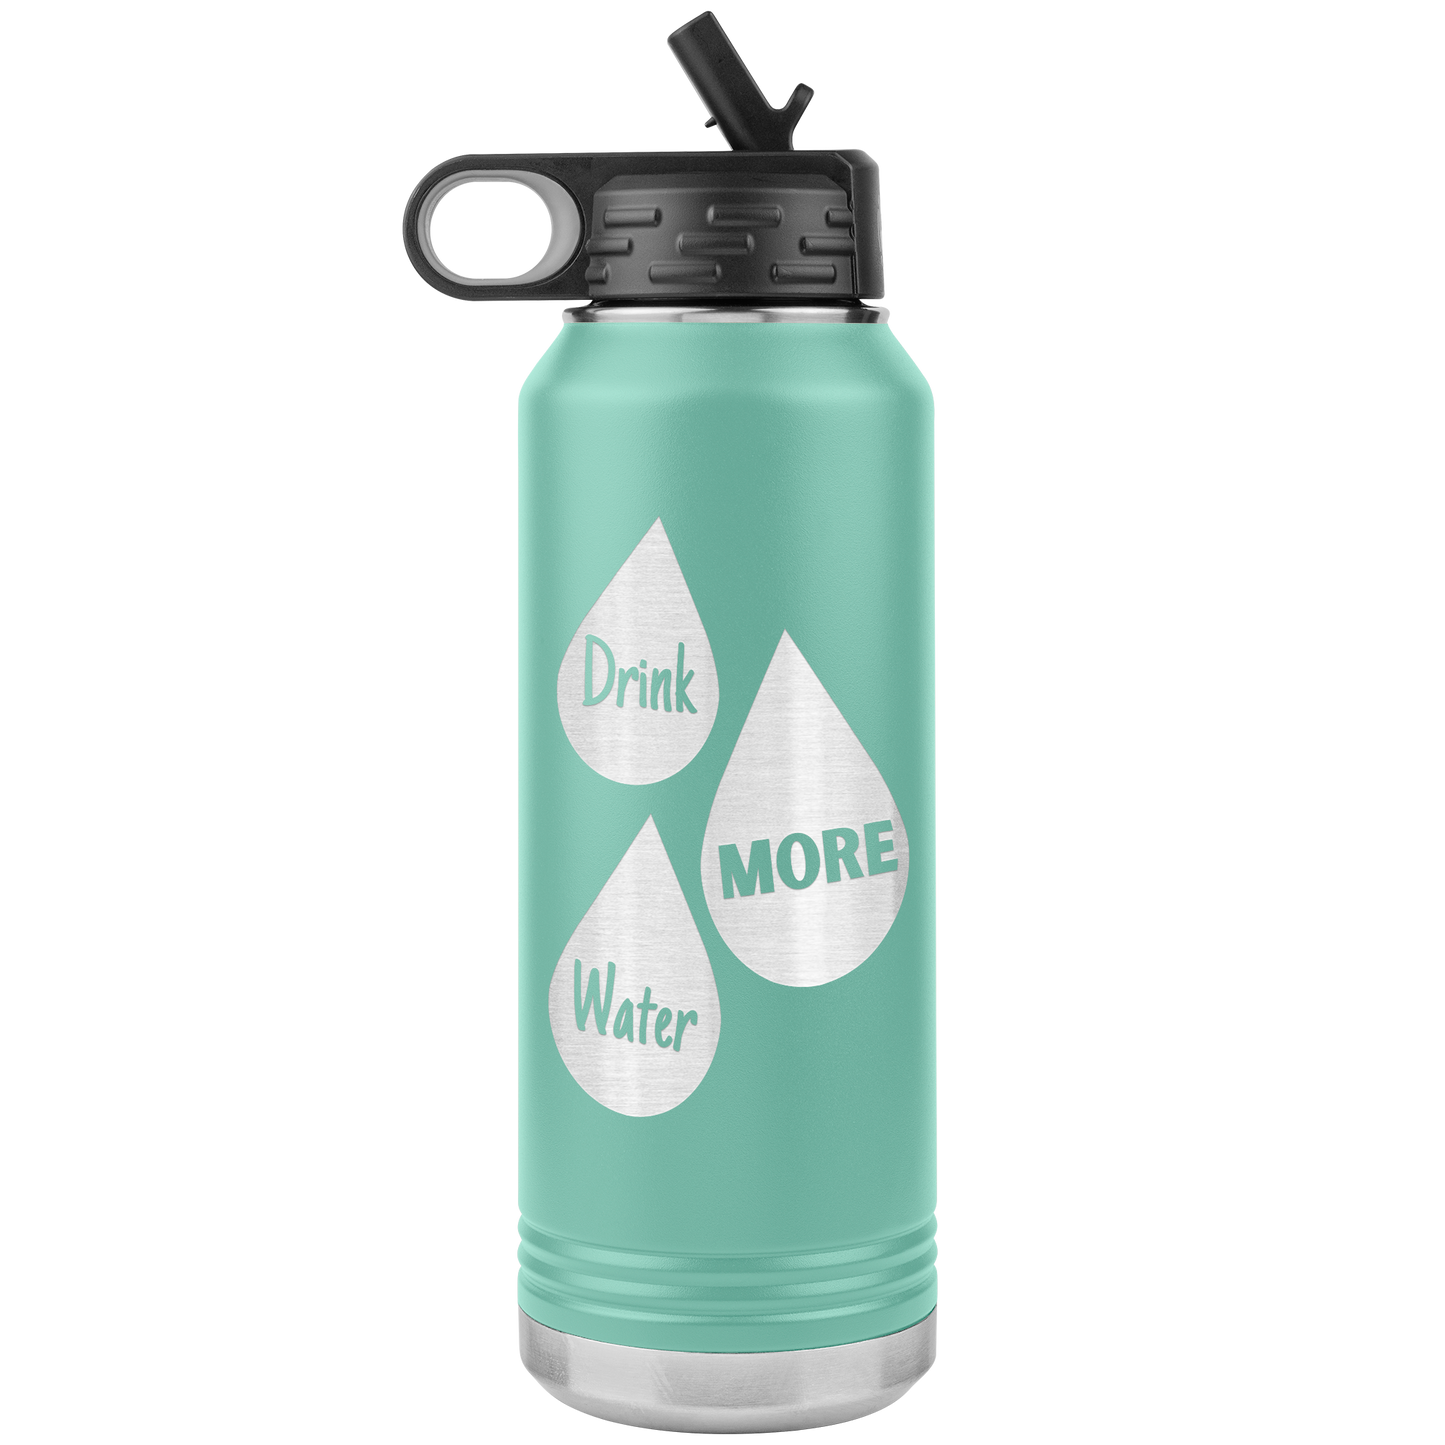 Stainless Steel Insulated Water Bottle Tumbler with Built-in Straw –  Nicolas Howard